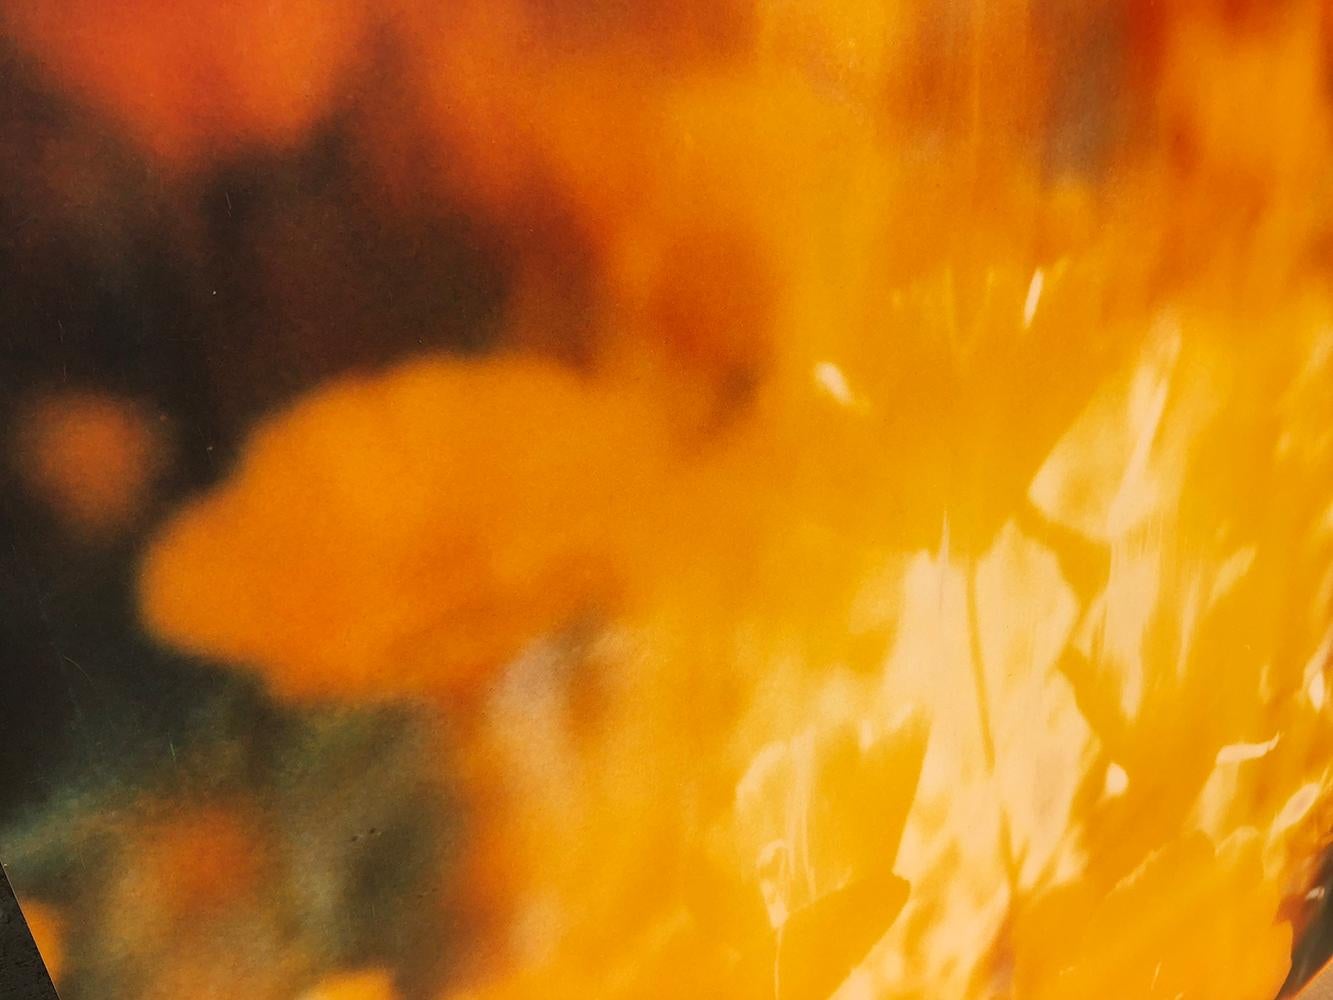 Yellow Flower  - The Last Picture Show, analog, 128x126cm, not mounted - Photograph by Stefanie Schneider